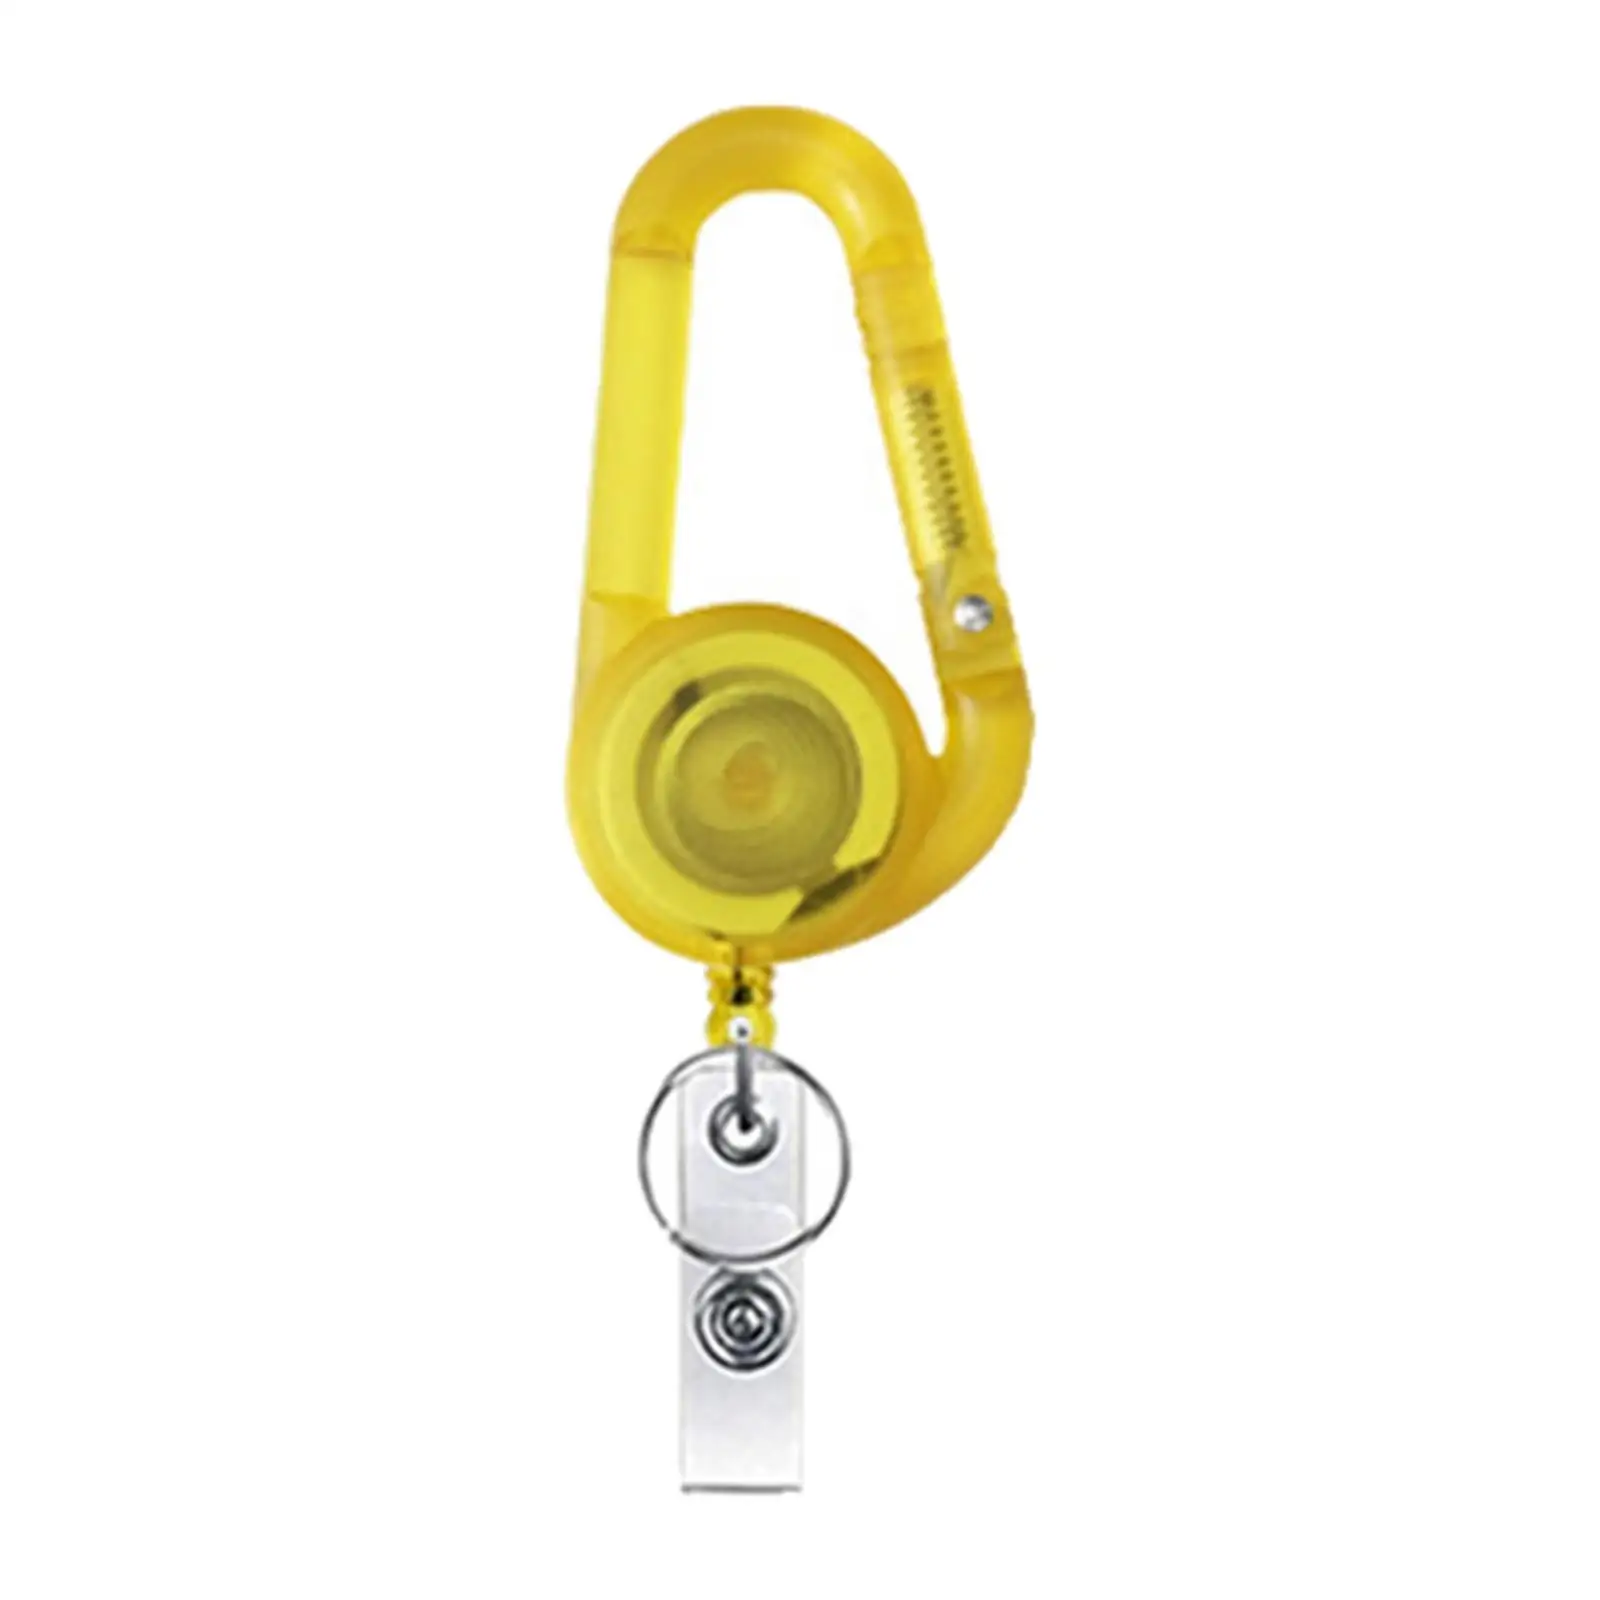 Keychain Retractable Durable D Ring Accessories Lock Snap Hooks Keyrings Carabiners for Sports Bottle Backpack Travel Men Women